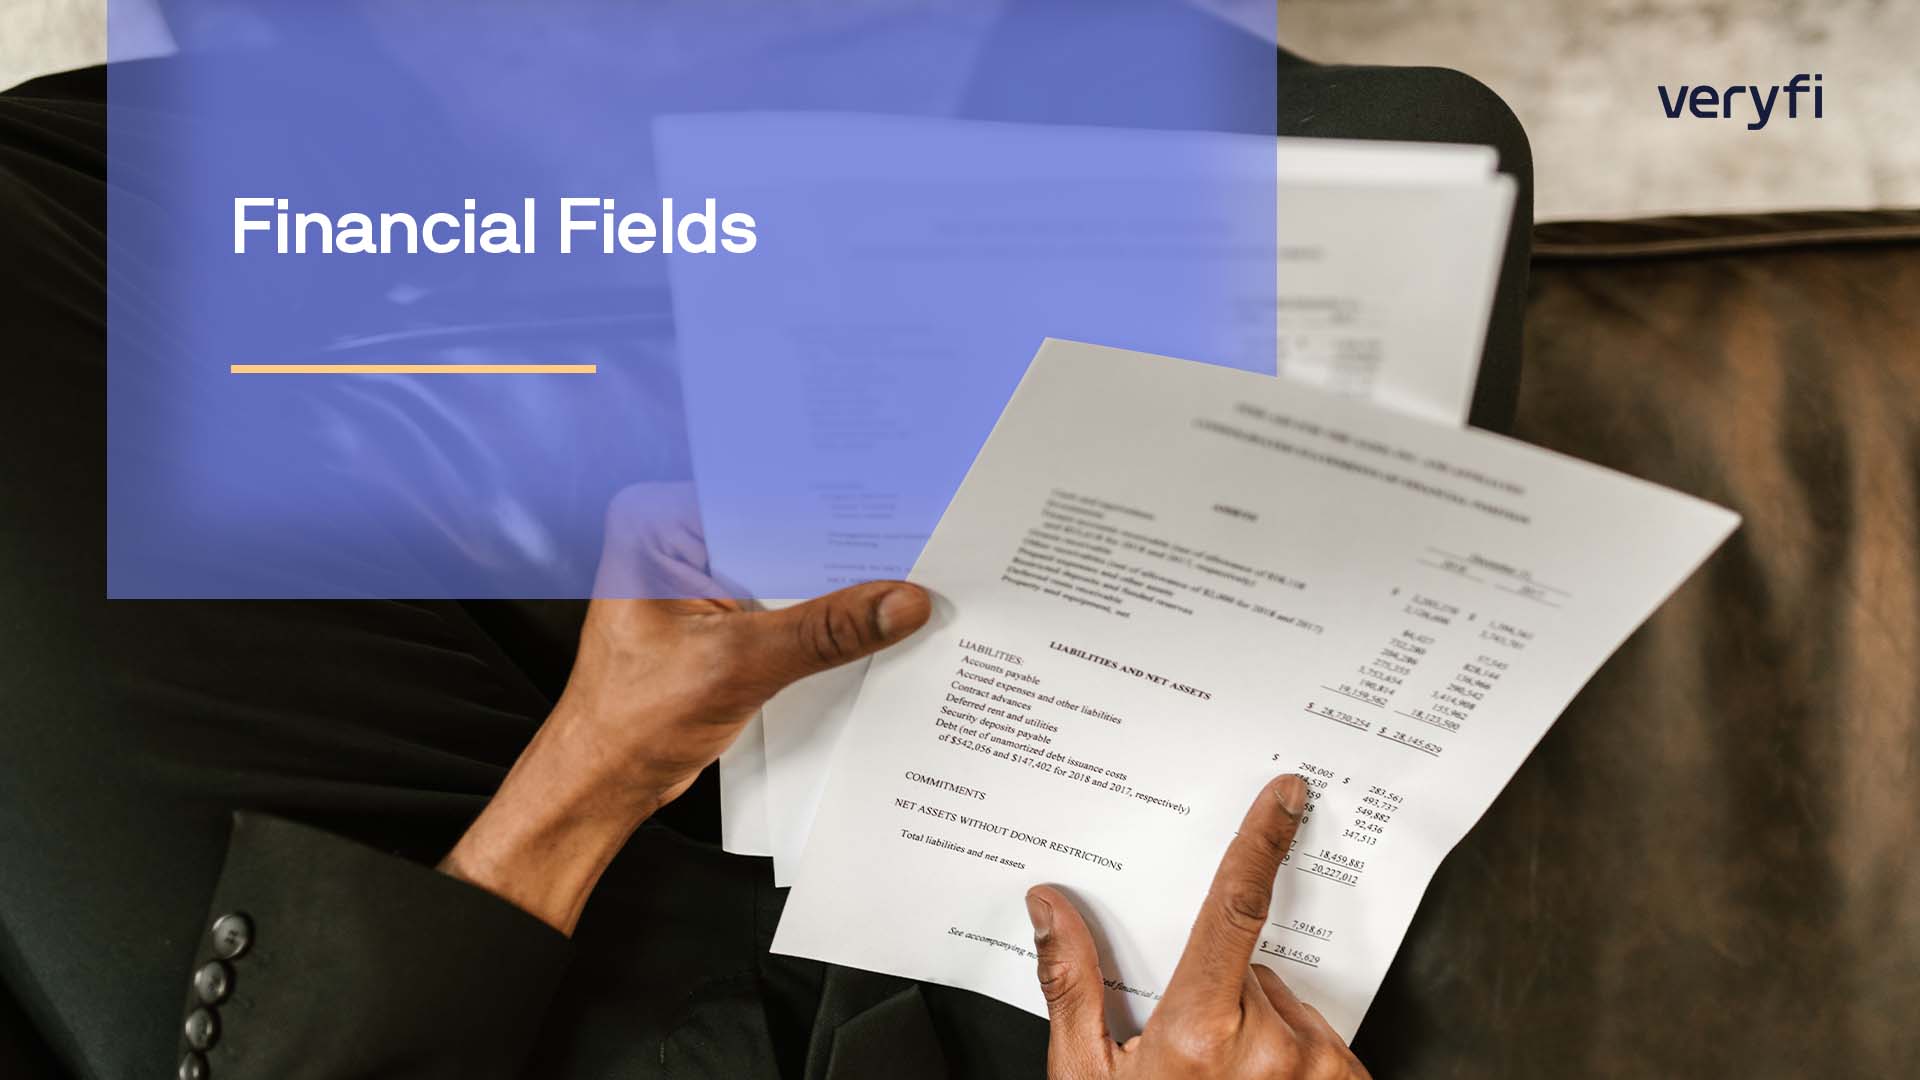 Financial fields are a powerful set of data points that have broad use cases and will help your organization to uncover insights related to spending, taxation, shipping, currency, and financial reconciliation.